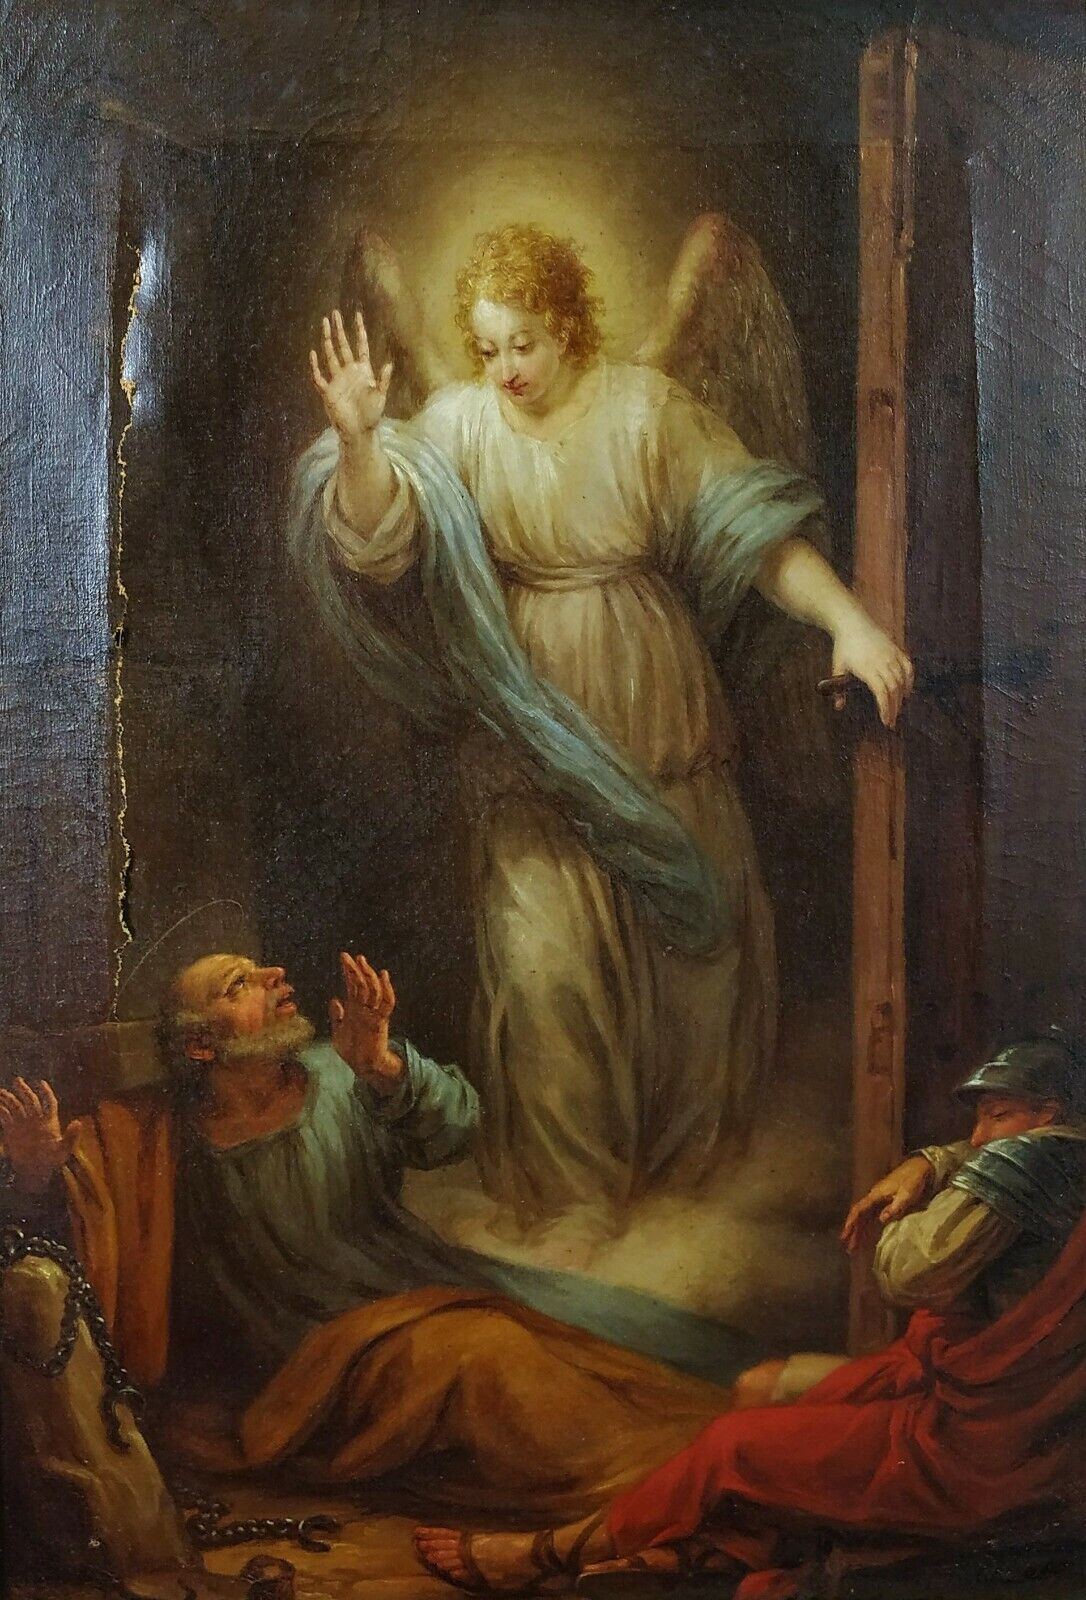 THE LIBERATION OF SAINT PETER BY THE ANGEL. SIGNED TORRES. PAINTING. SPAIN. 1861